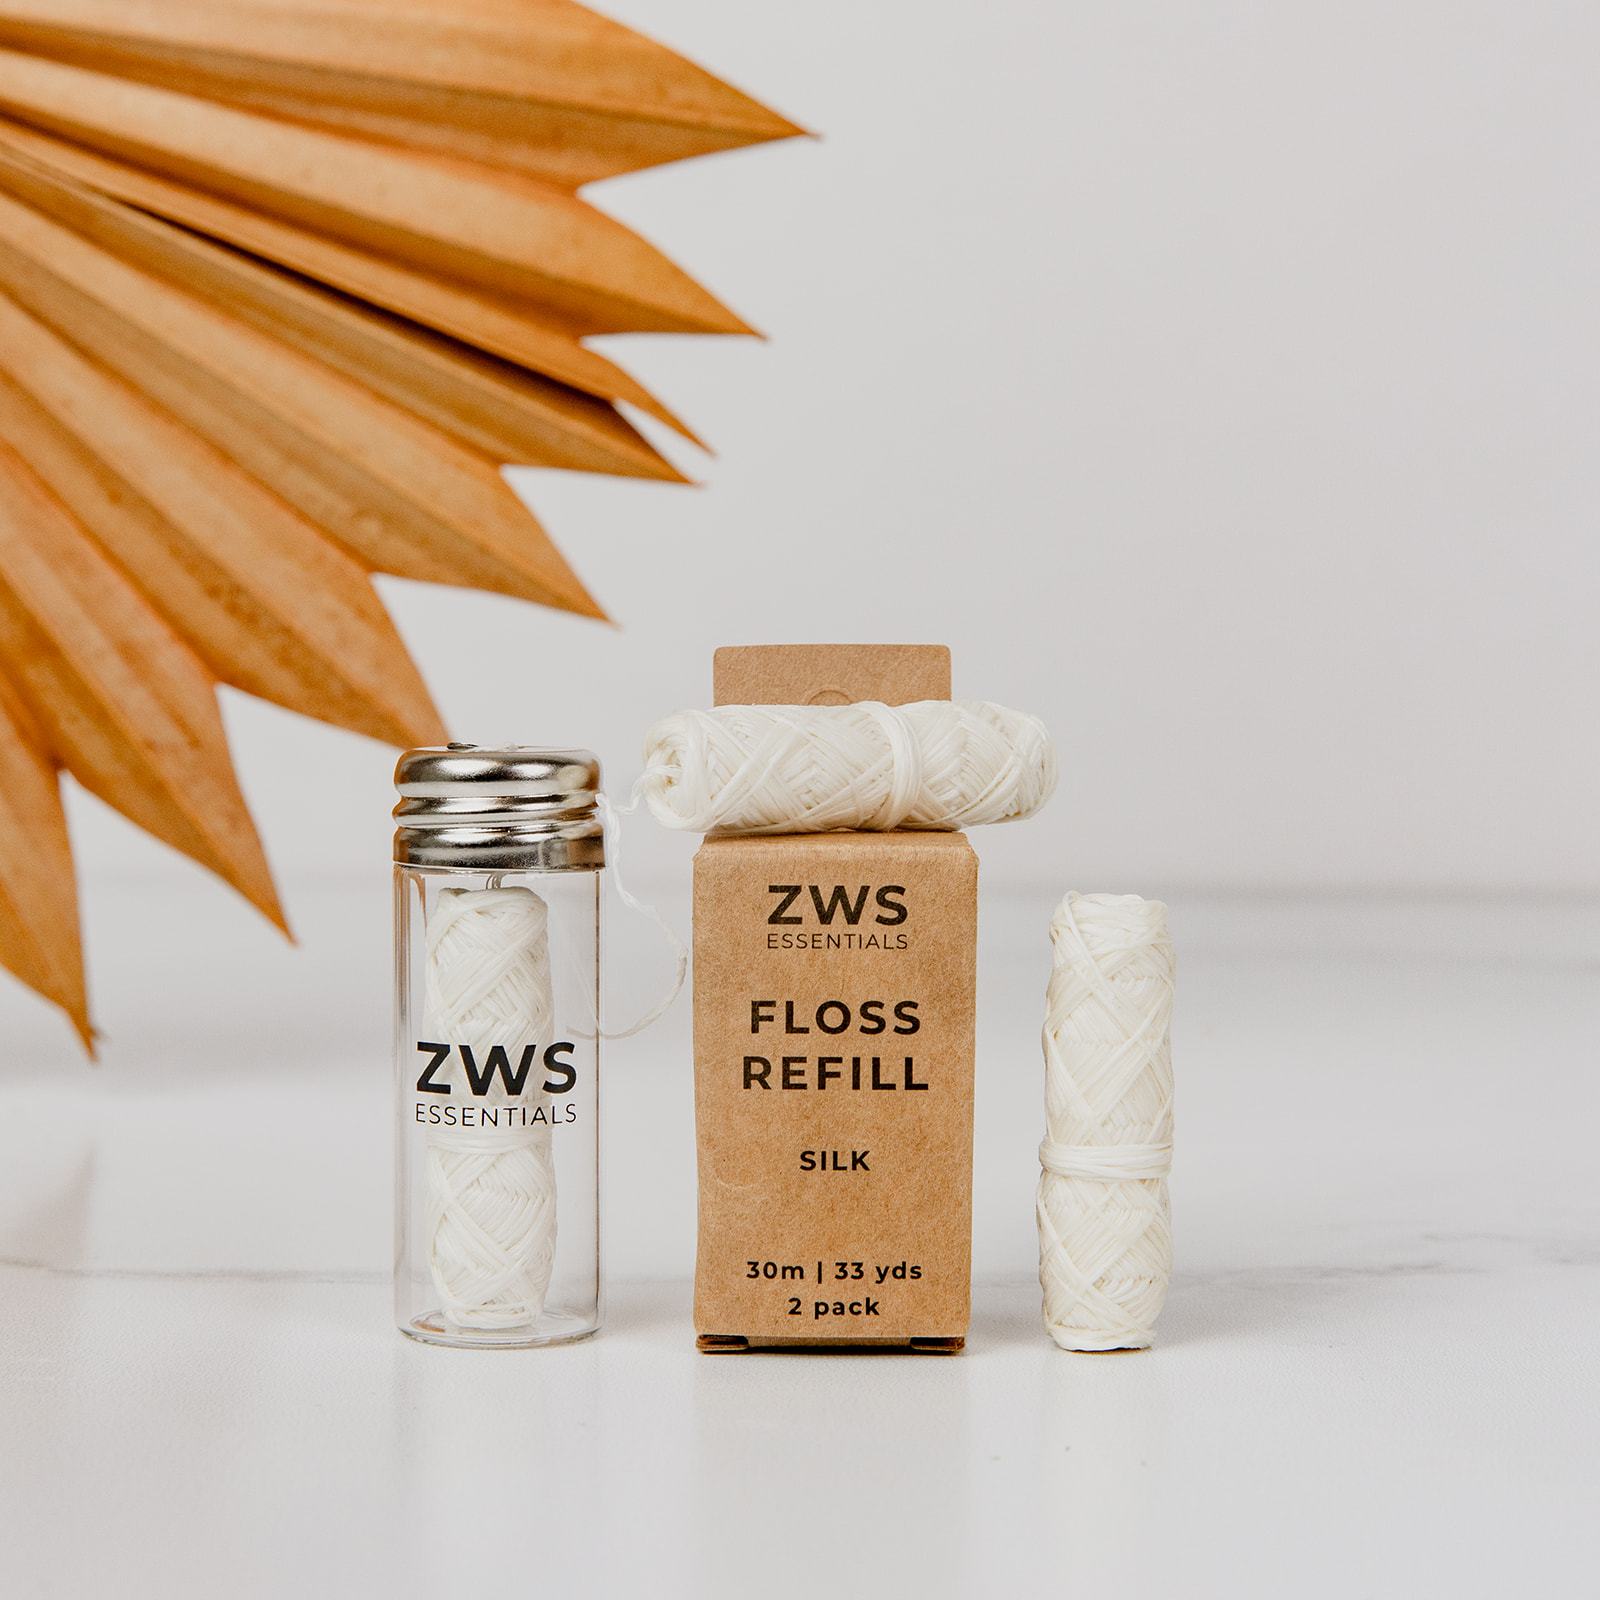 Clean sustainable silk floss – nudge